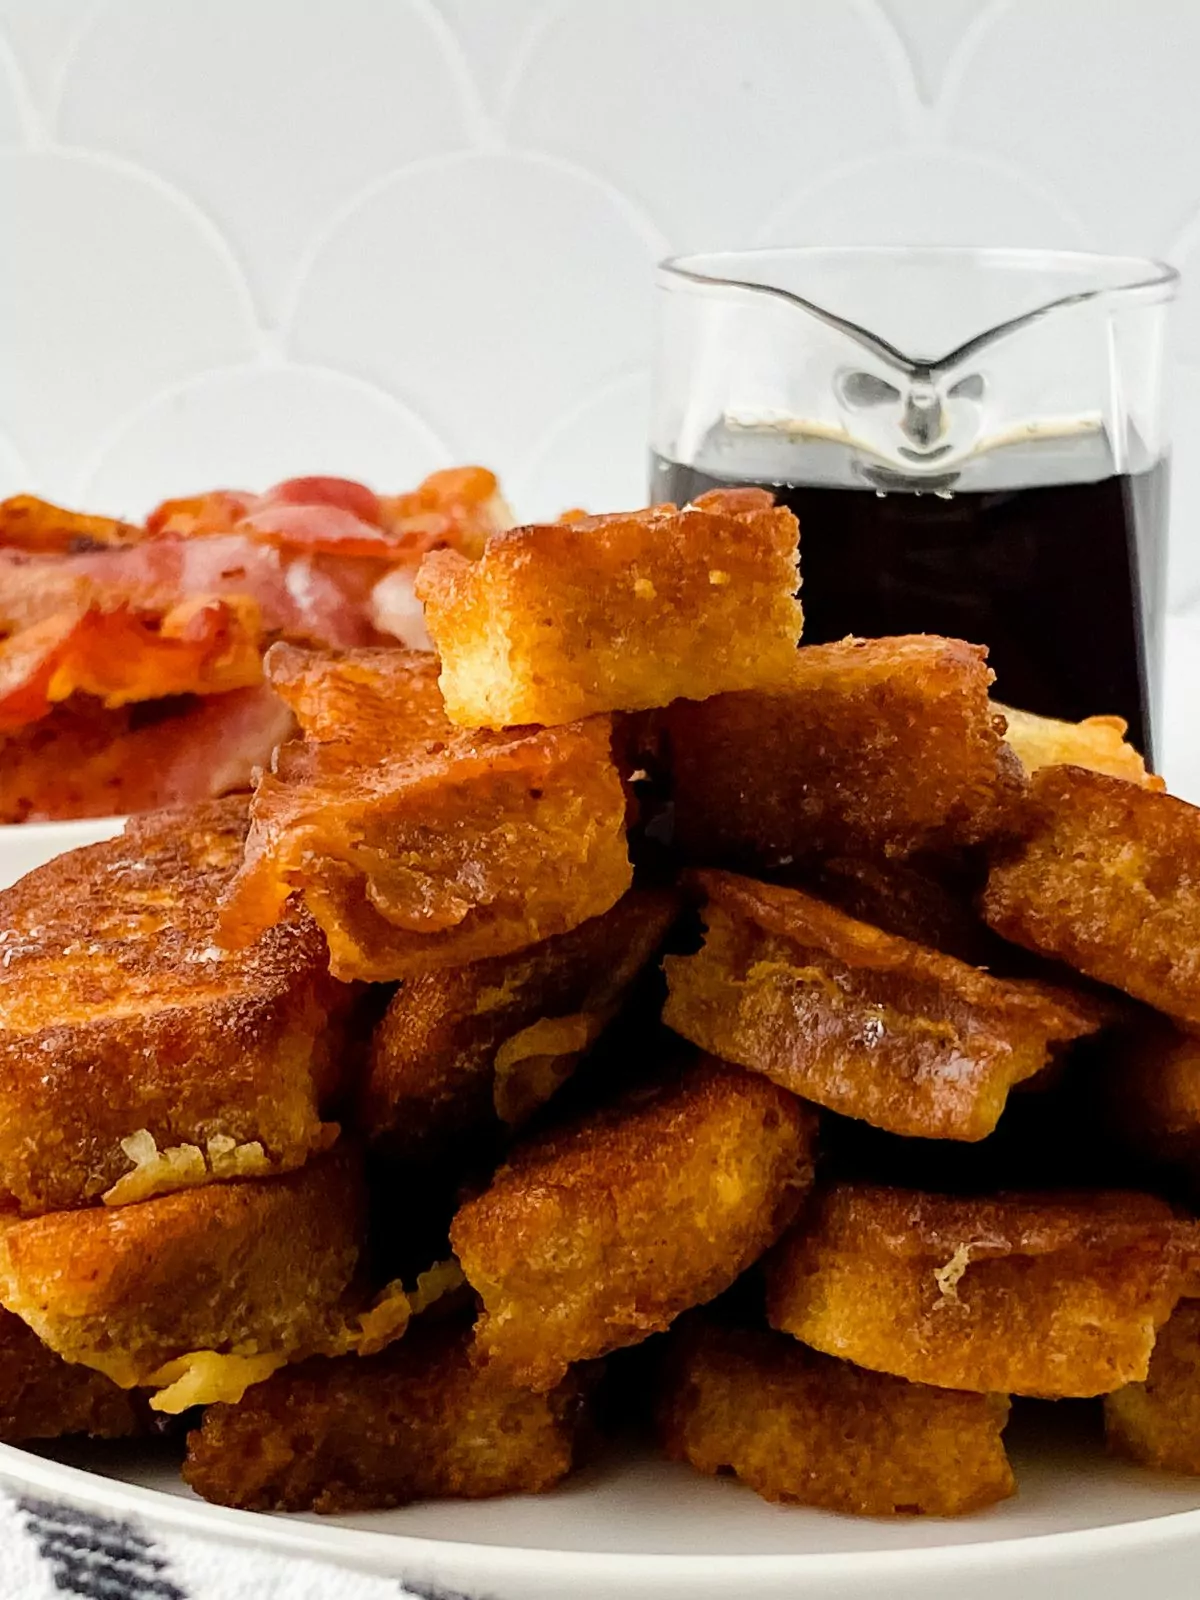 French toast sticks made with sandwich bread on plate.